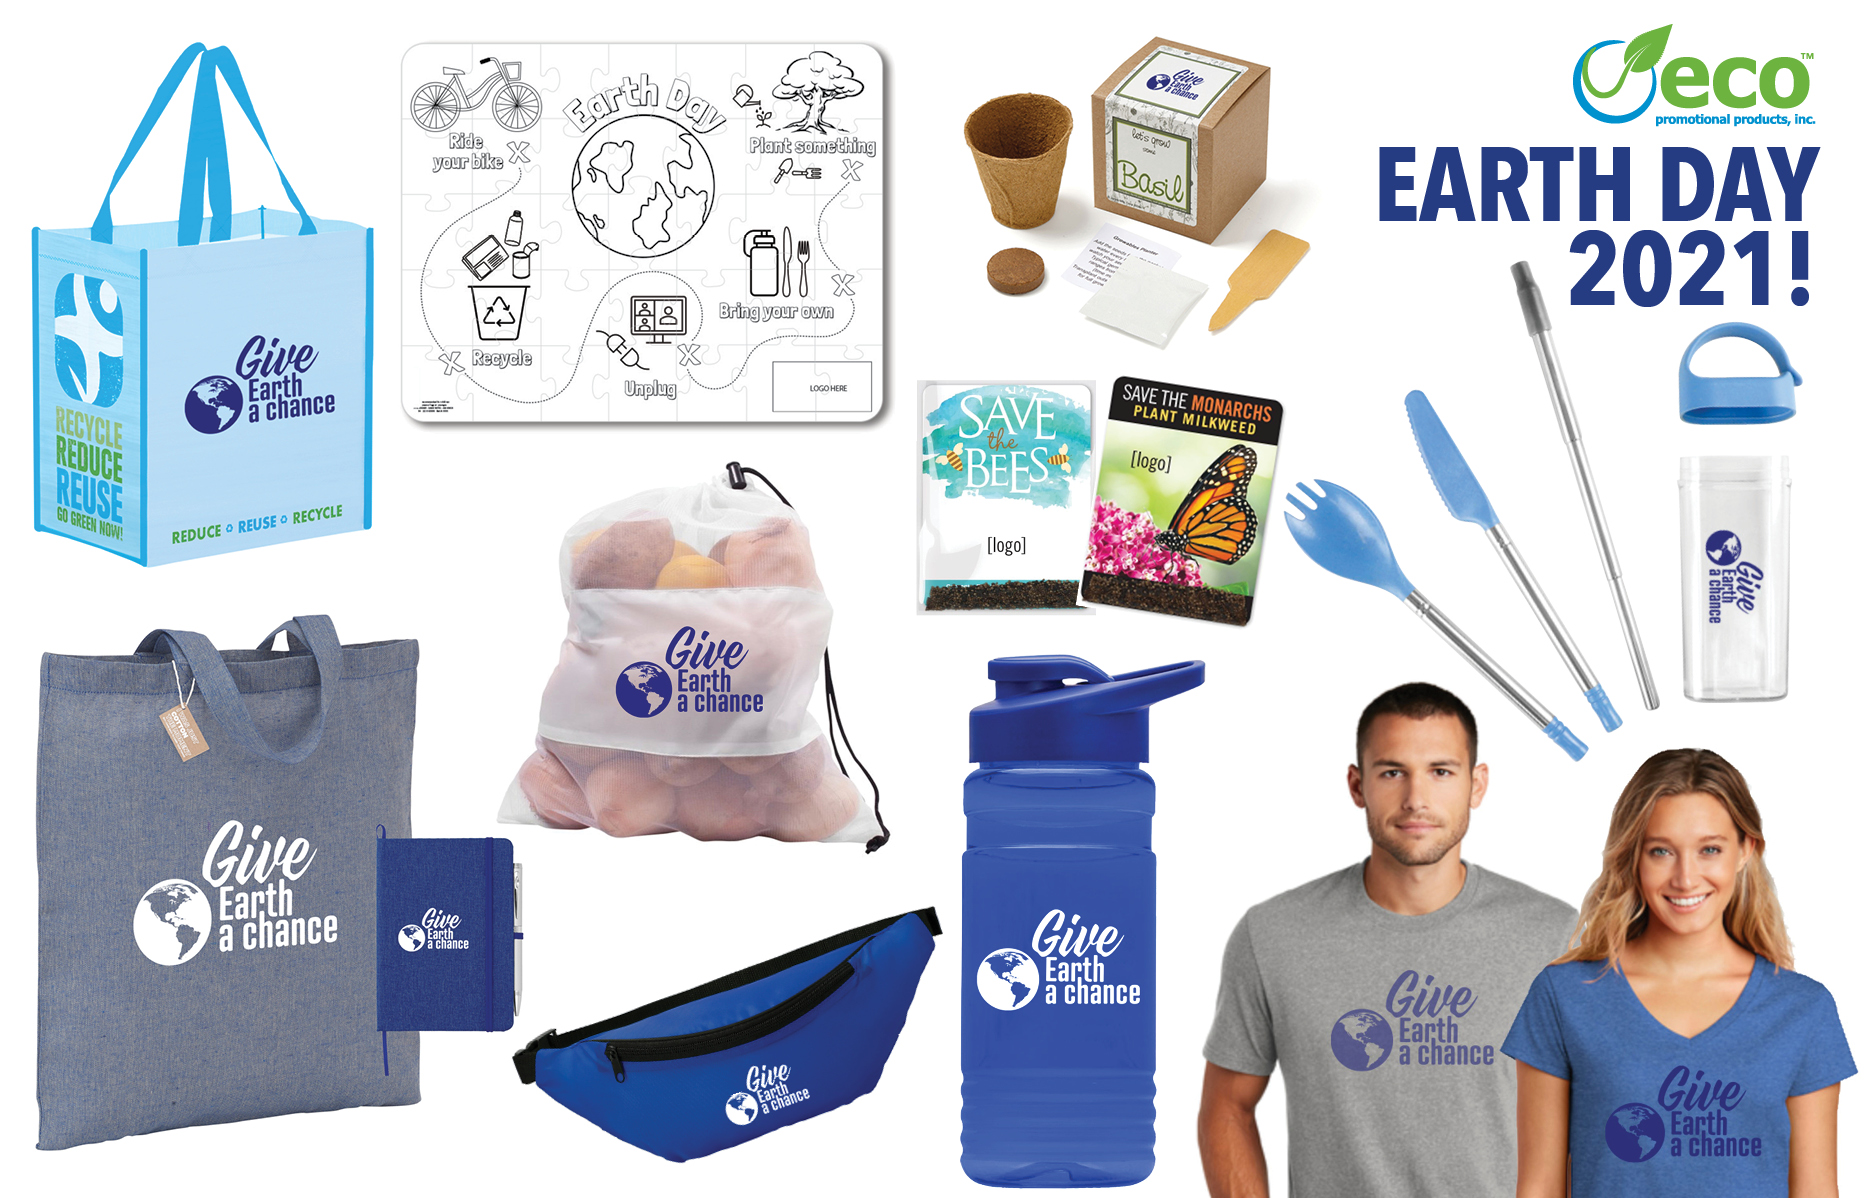 Top 10 Eco-Friendly Promotional Products for Earth Day 2021